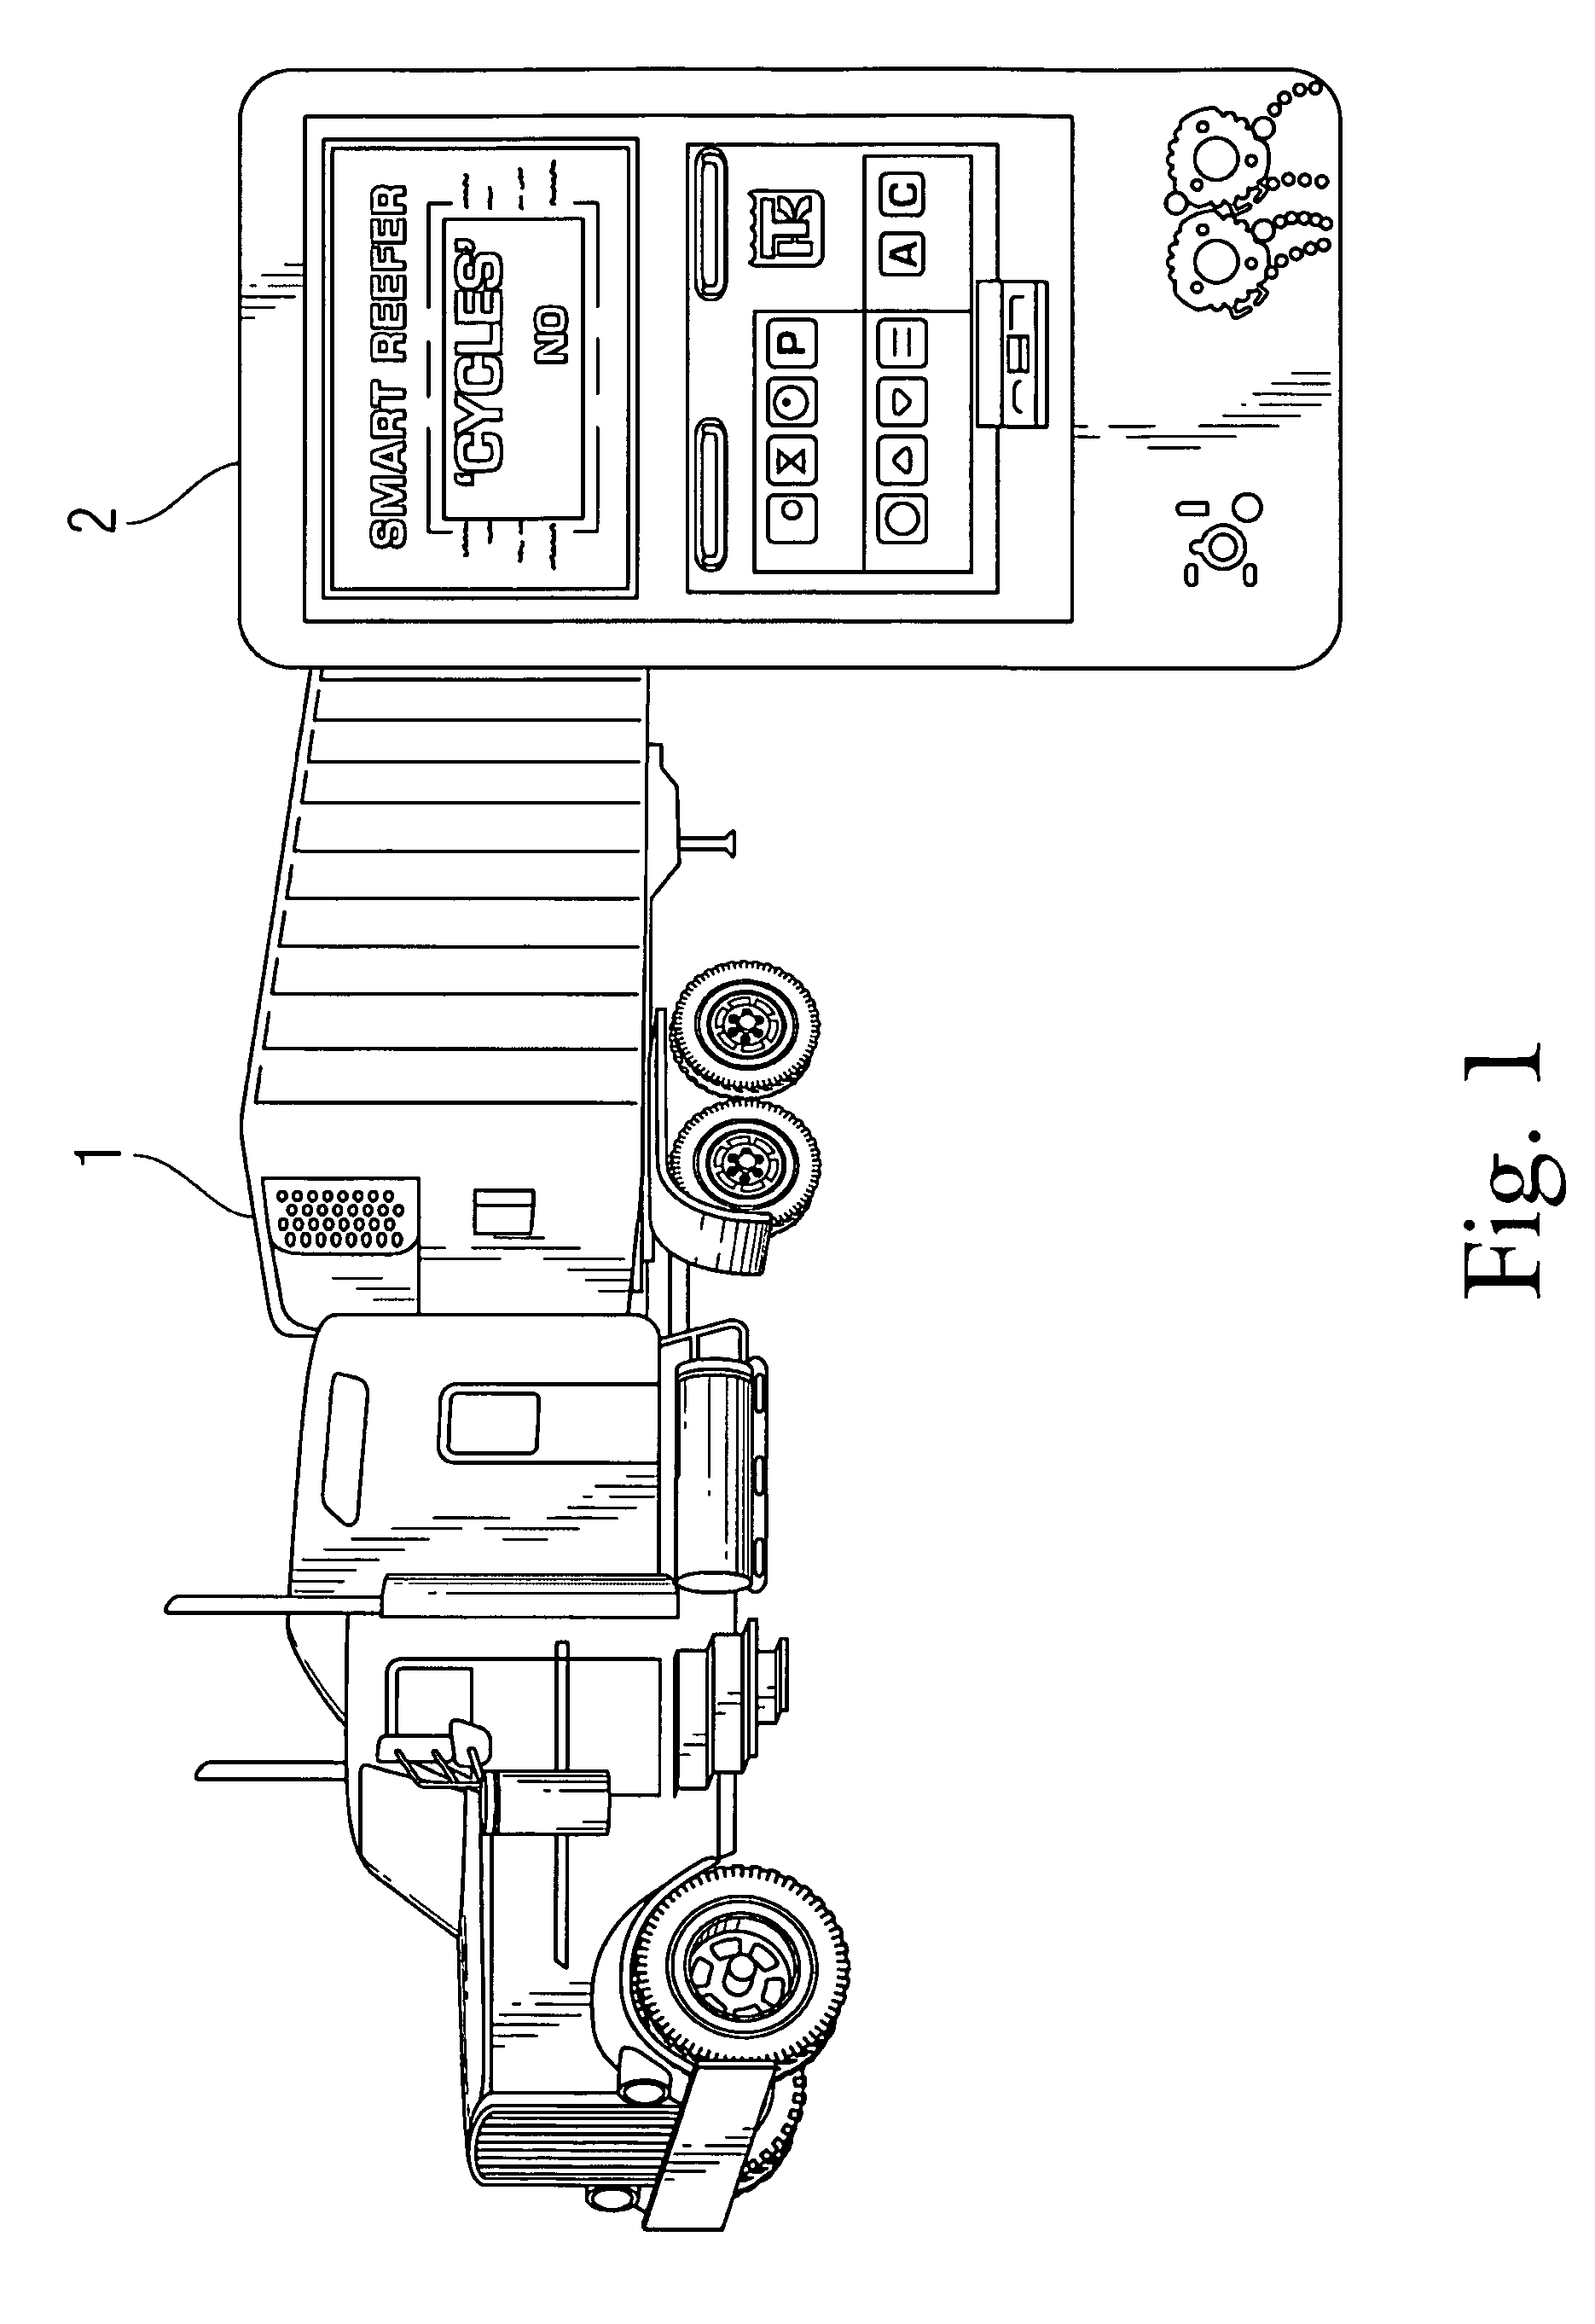 Auxiliary power device for refrigerated trucks